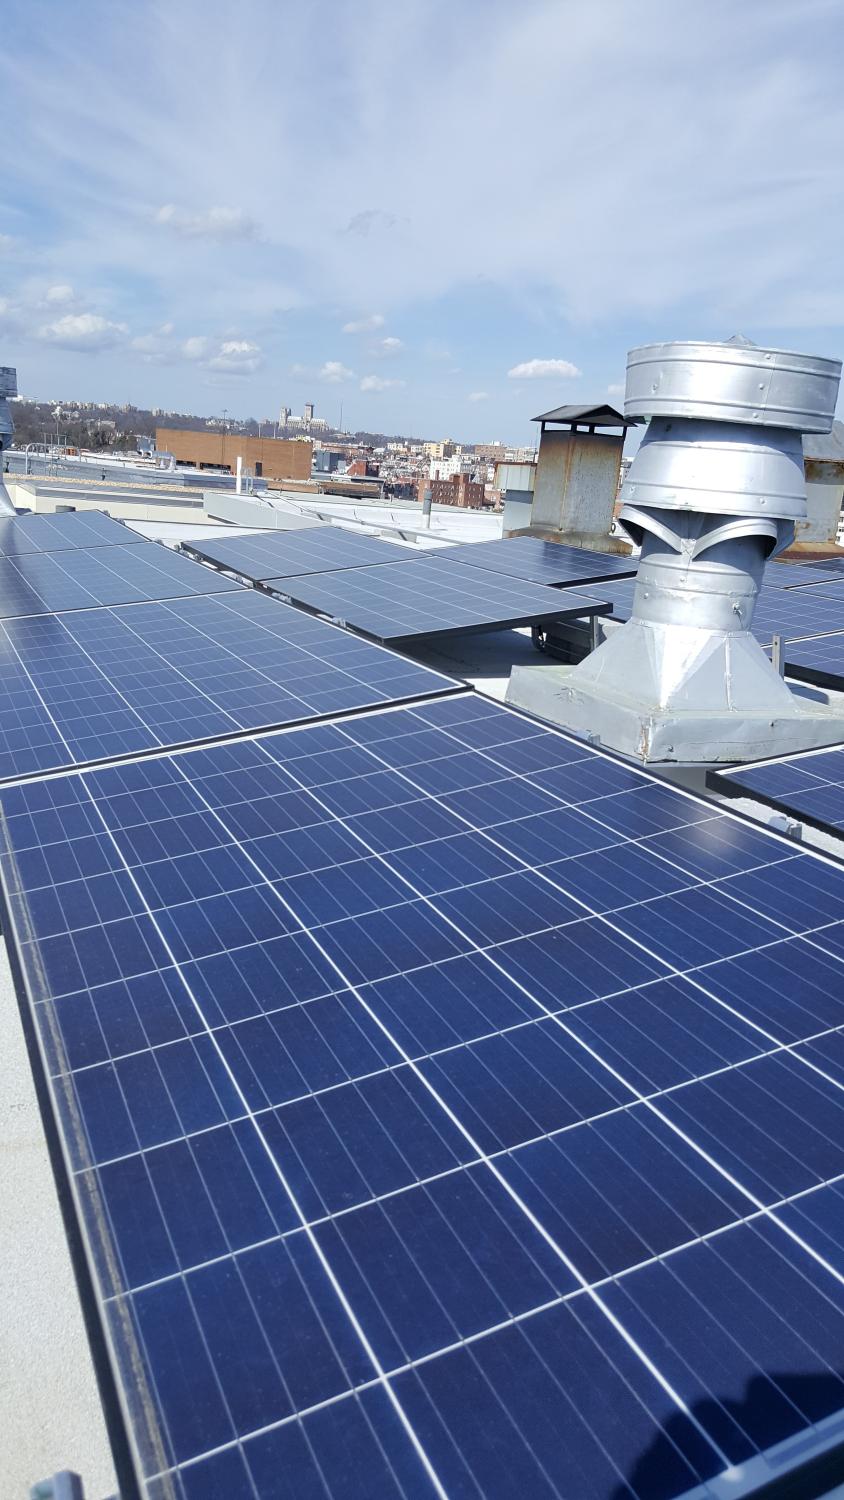 Solar panels on Brookings Institution's roof